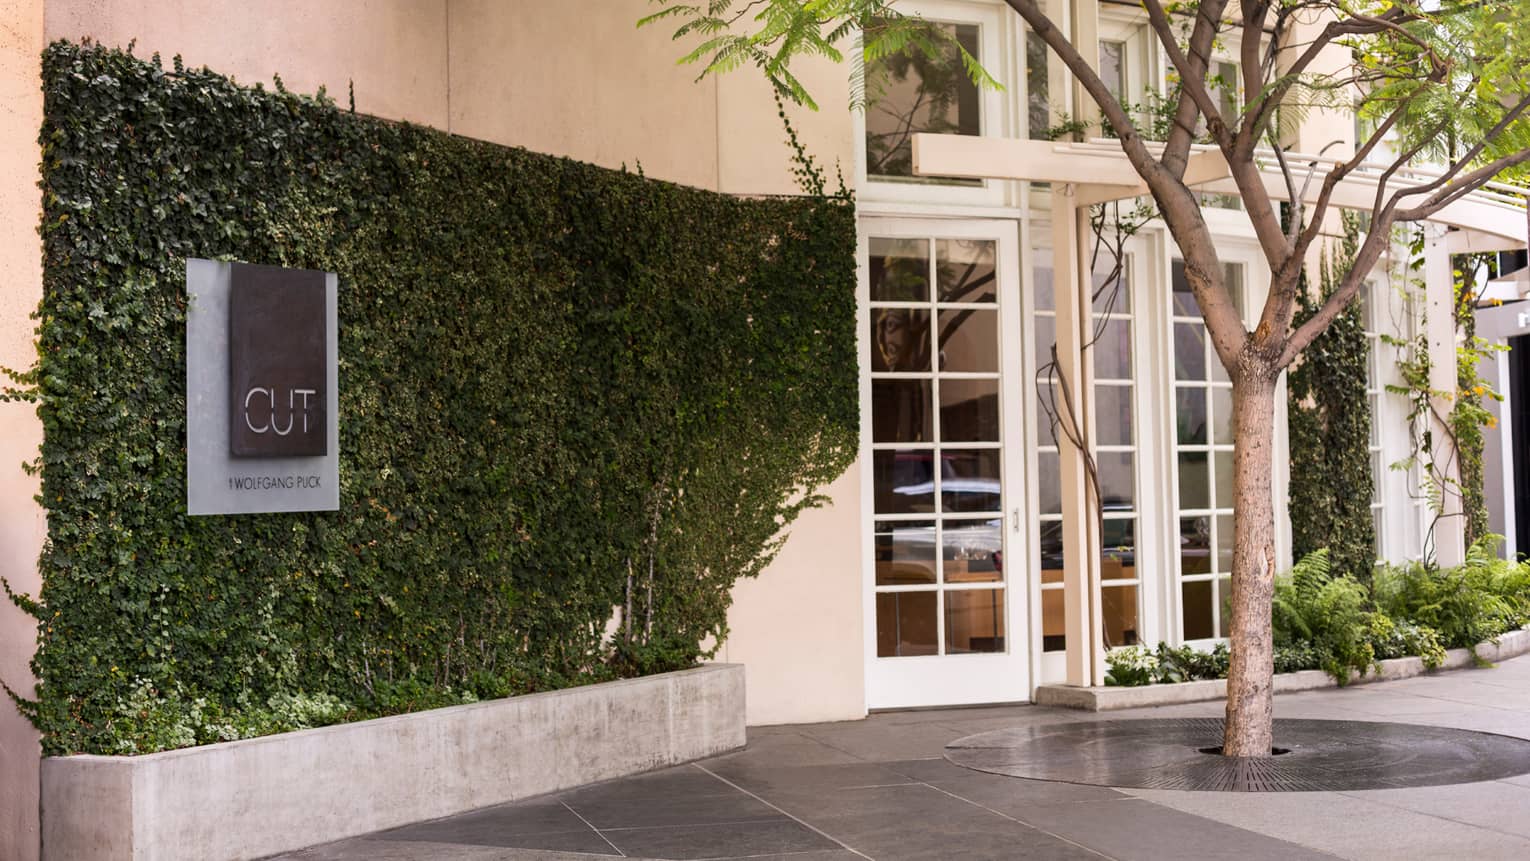 Cut by Wolfgang Puck sign on ivy-covered brick wall at hotel entrance